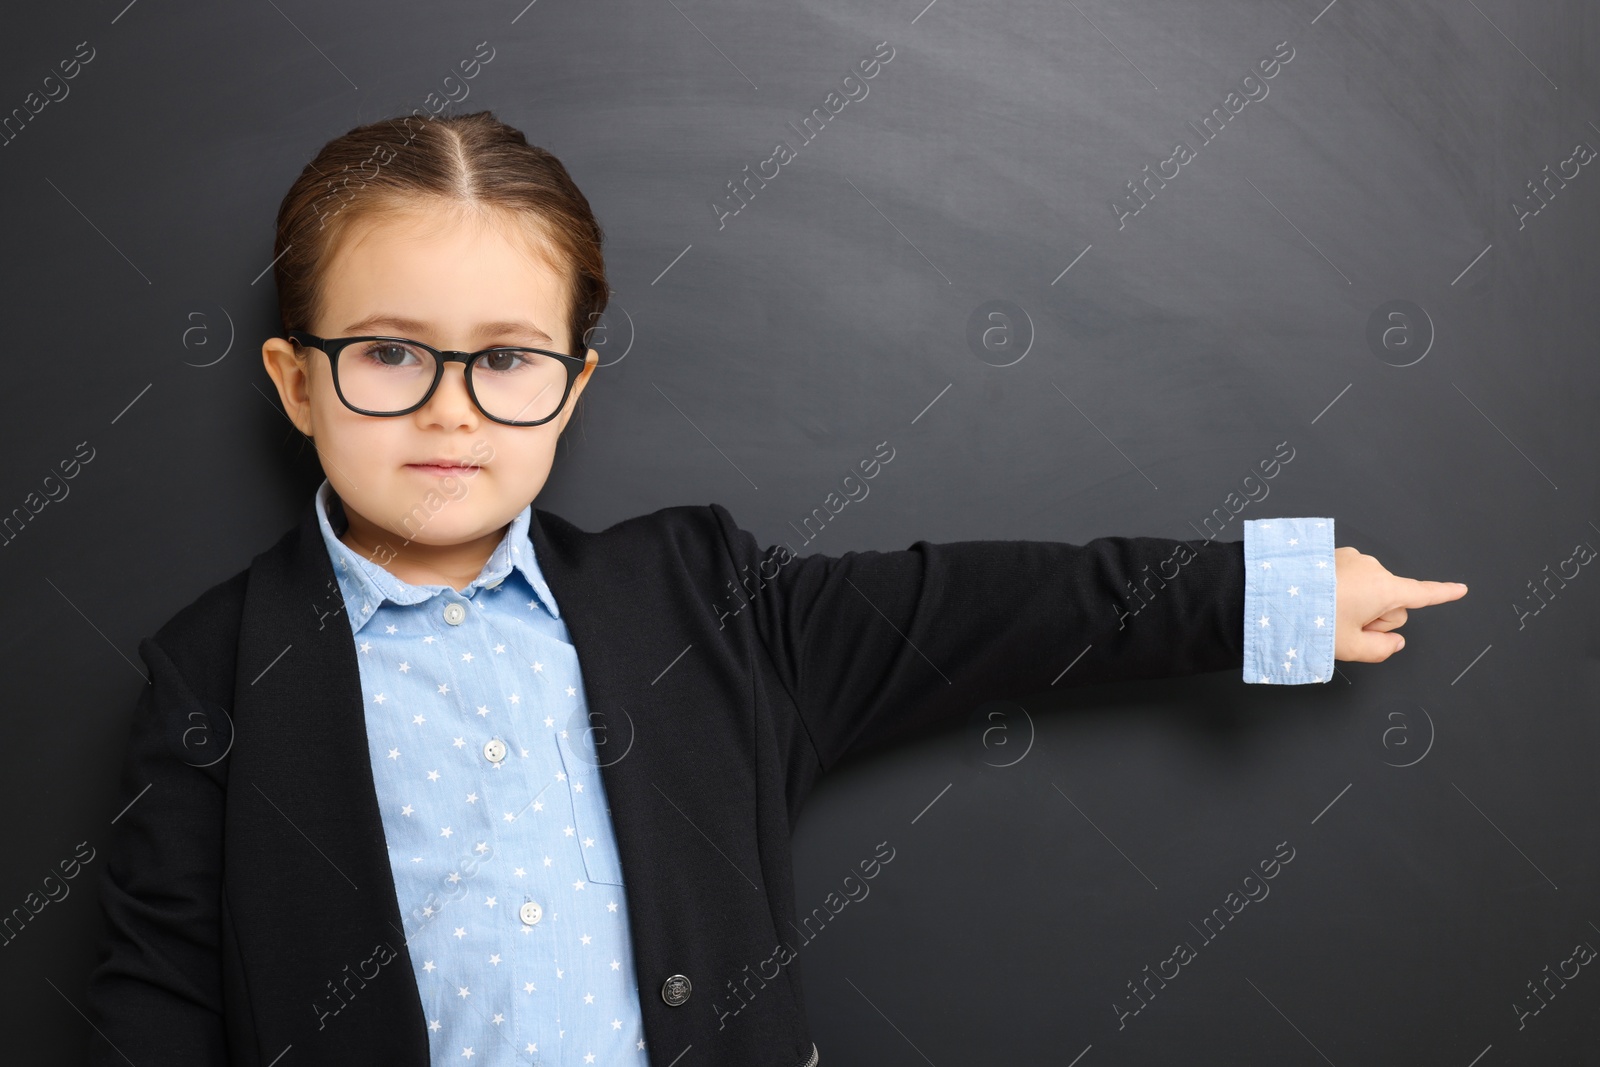 Photo of Little school child in uniform pointing at something near chalkboard